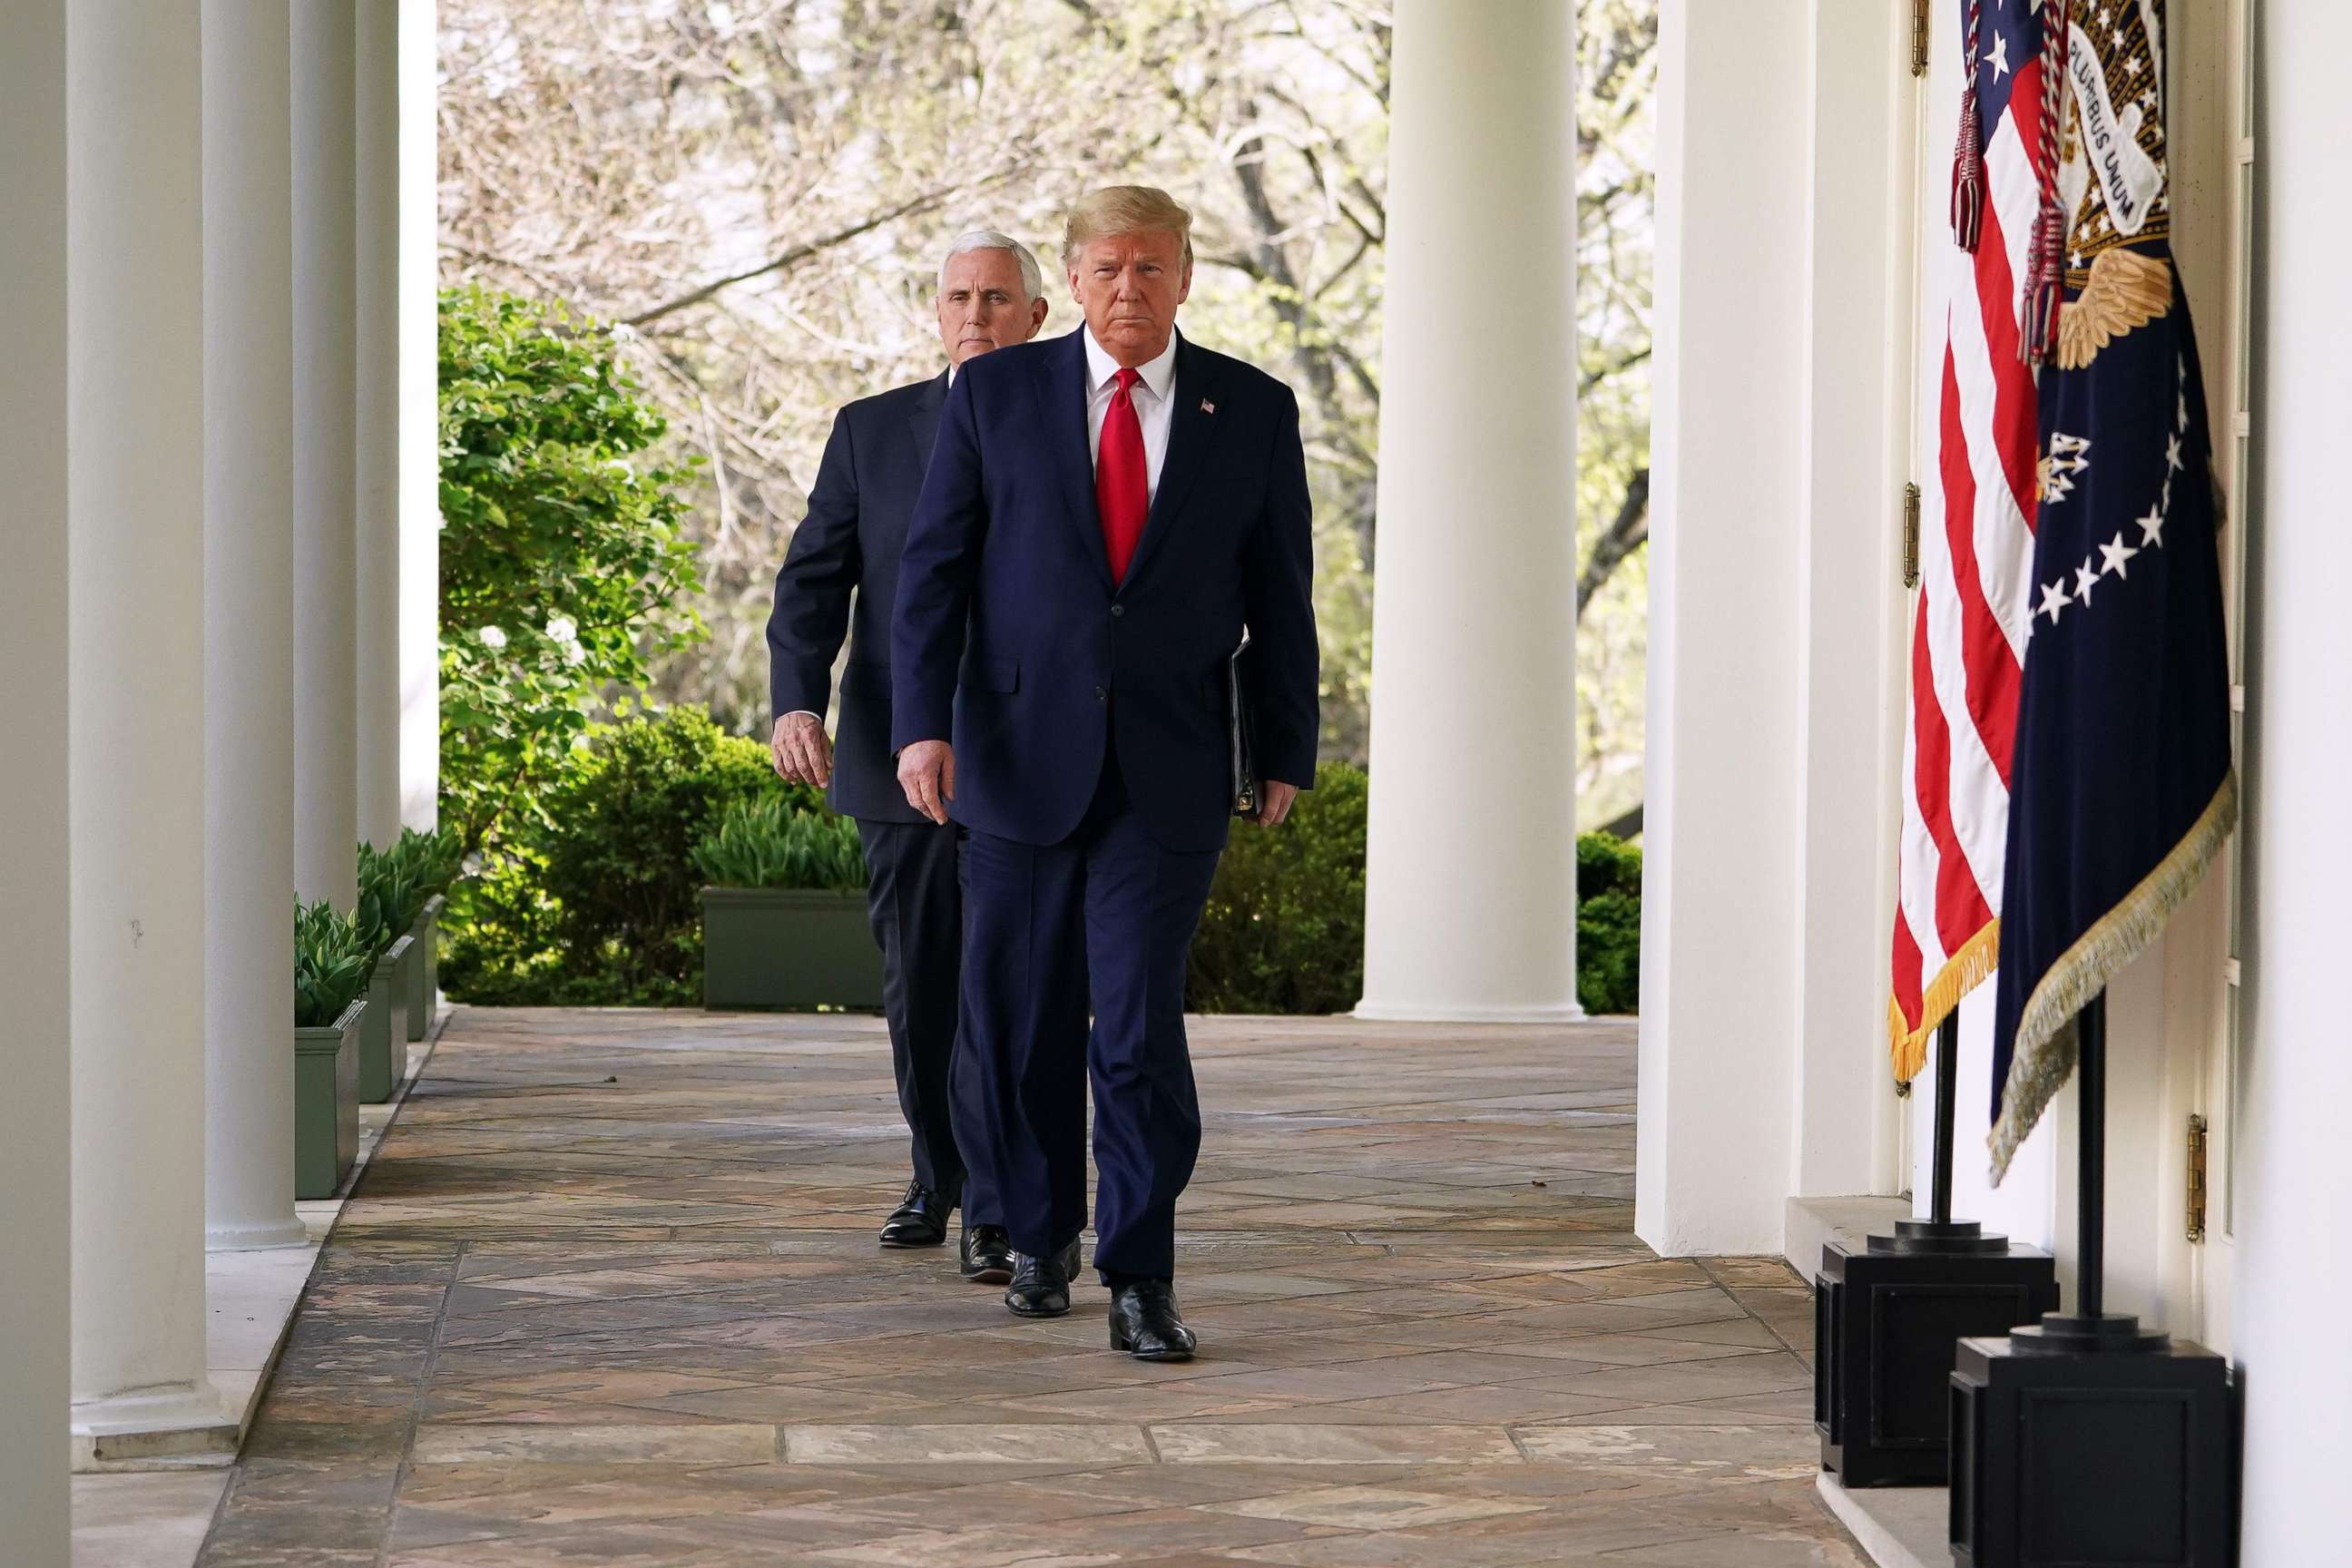 PHOTO: President Donald Trump and Vice President Mike Pence walk to deliver the daily briefing on the novel coronavirus, COVID-19, in the Rose Garden of the White House in Washington, March 30, 2020.